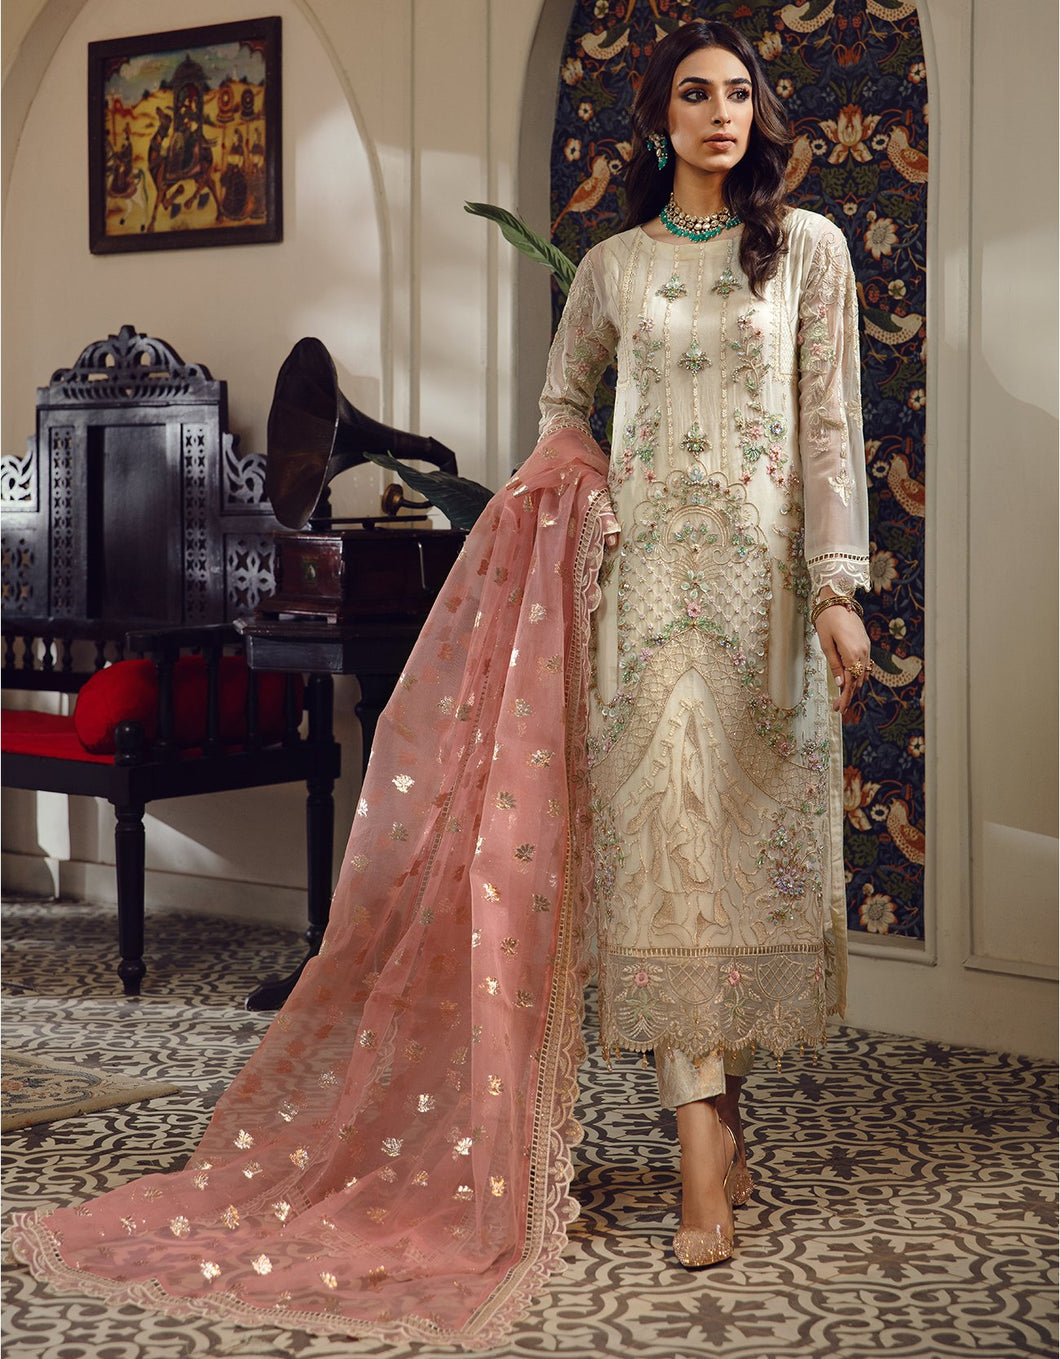 Buy EMAAN ADEEL | BELLE ROBE | VOL 2 | BL-01 Golden @LebaasOnline Net Embroidered had mirror work, New Indian & Pakistani Designer Partywear Suits at our DESIGNER BOUTIQUE UK is available with us. INDIAN BRIDAL DRESSES ONLINE USA can be easily customized for evening/party wear. Get PAKISTANI DESIGNER DRESSES in USA